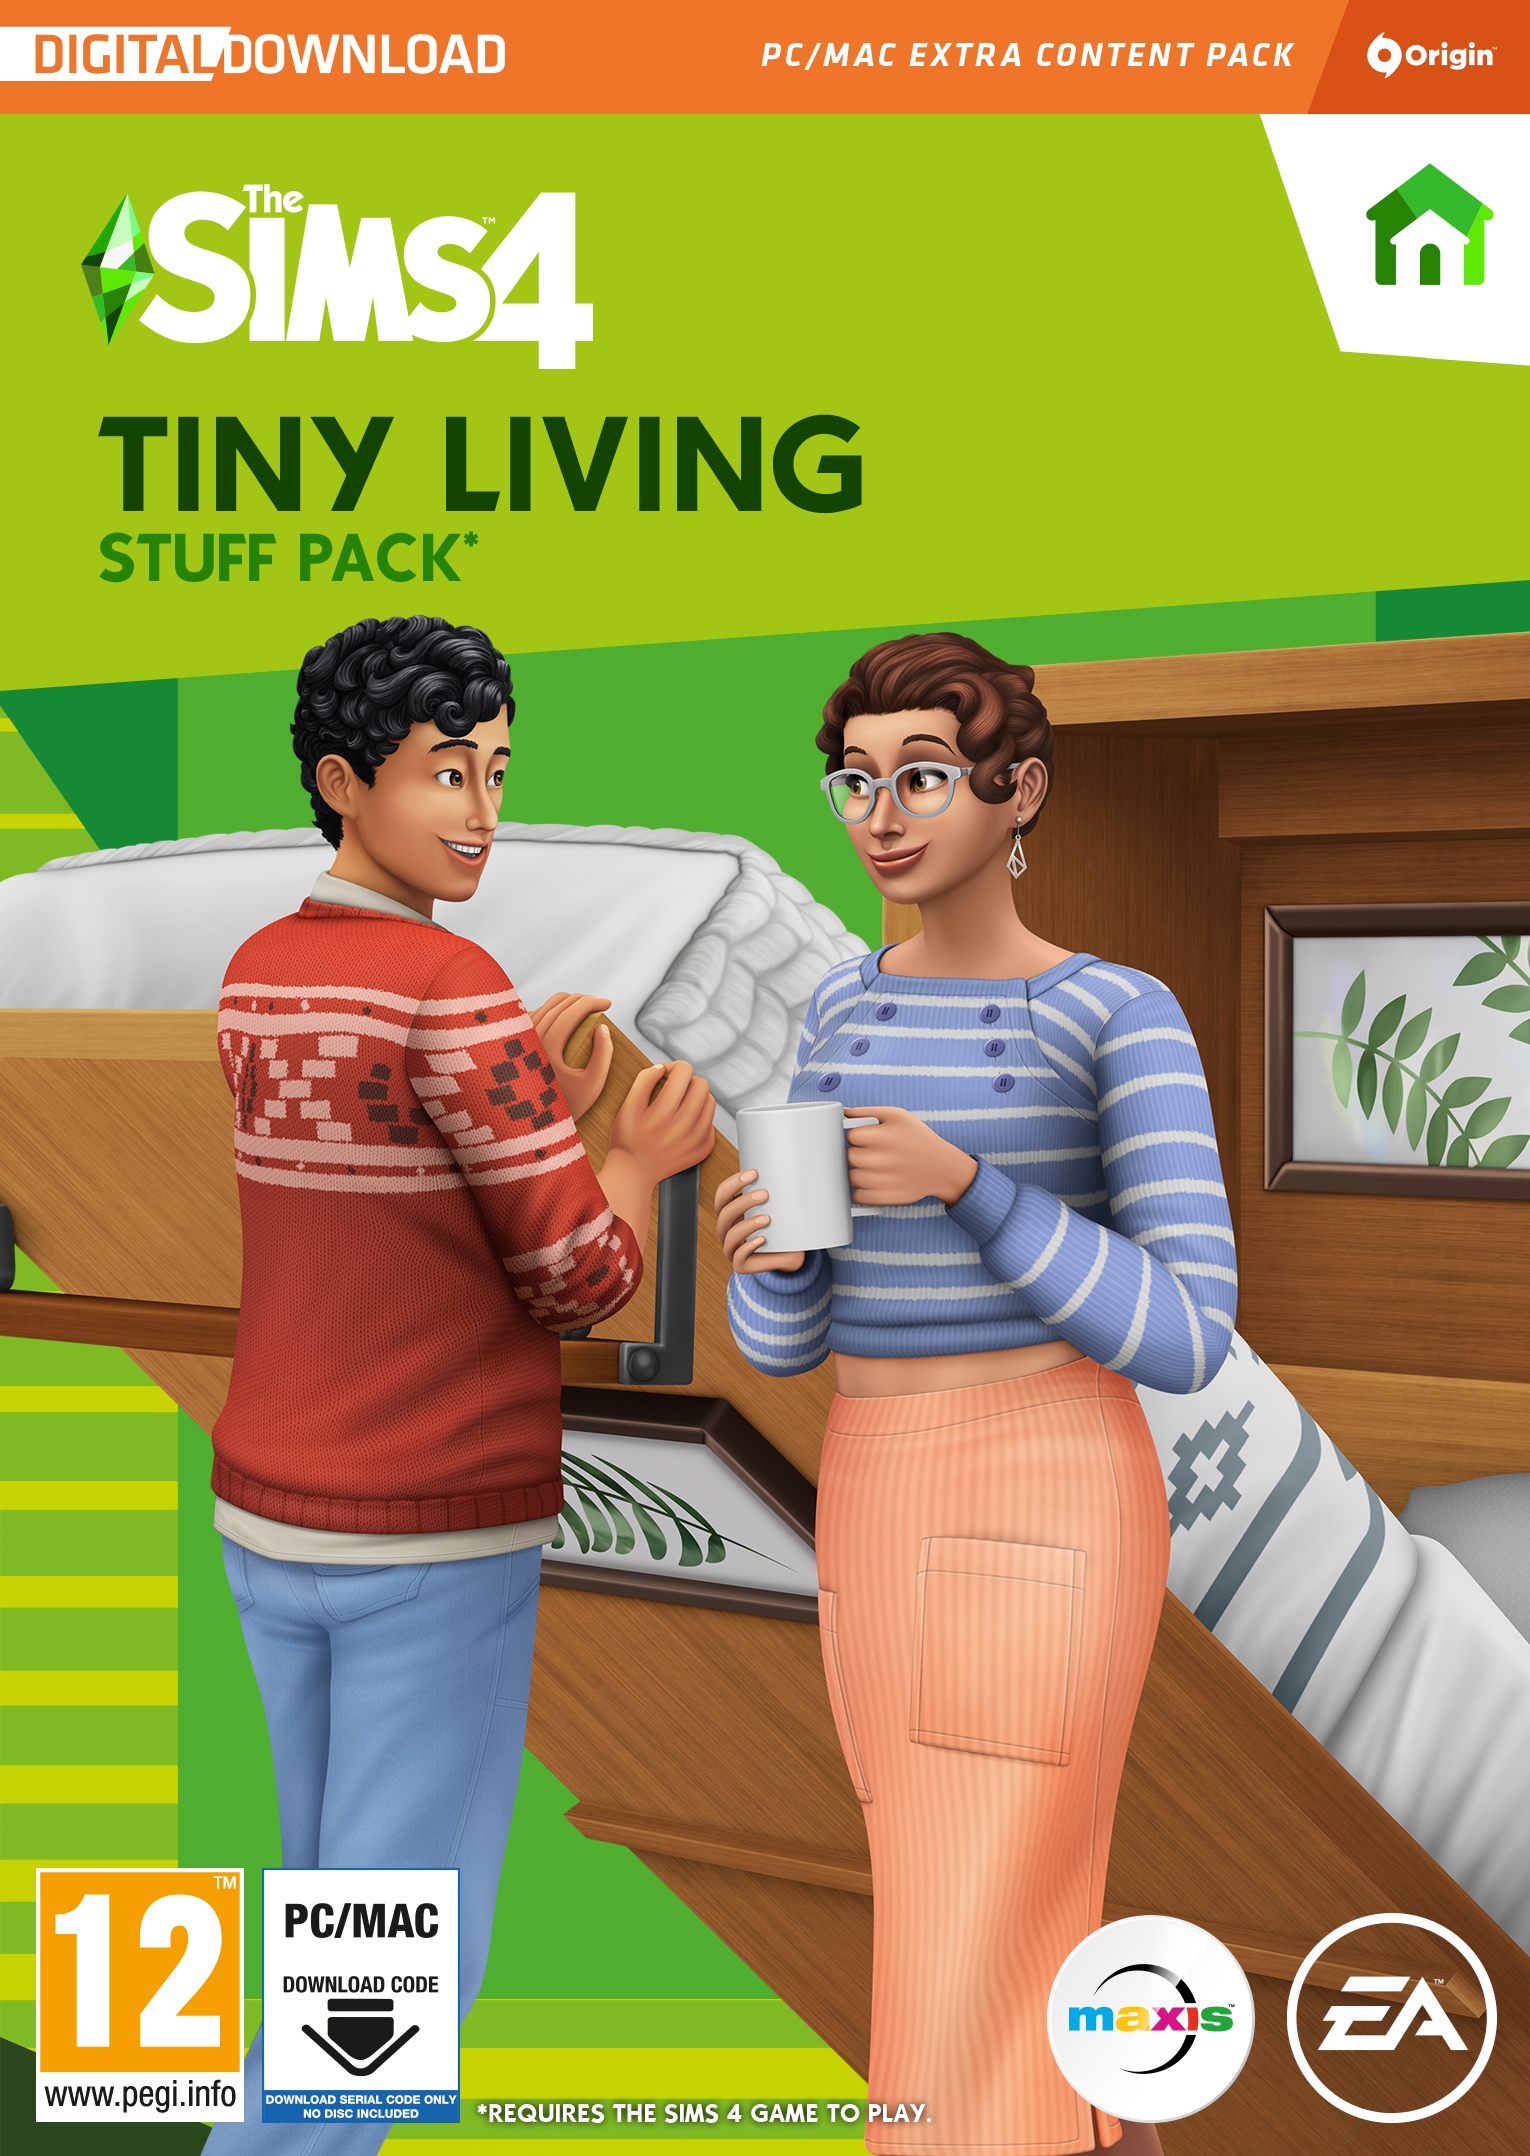 THE SIMS 4 (SP16) TINY LIVING